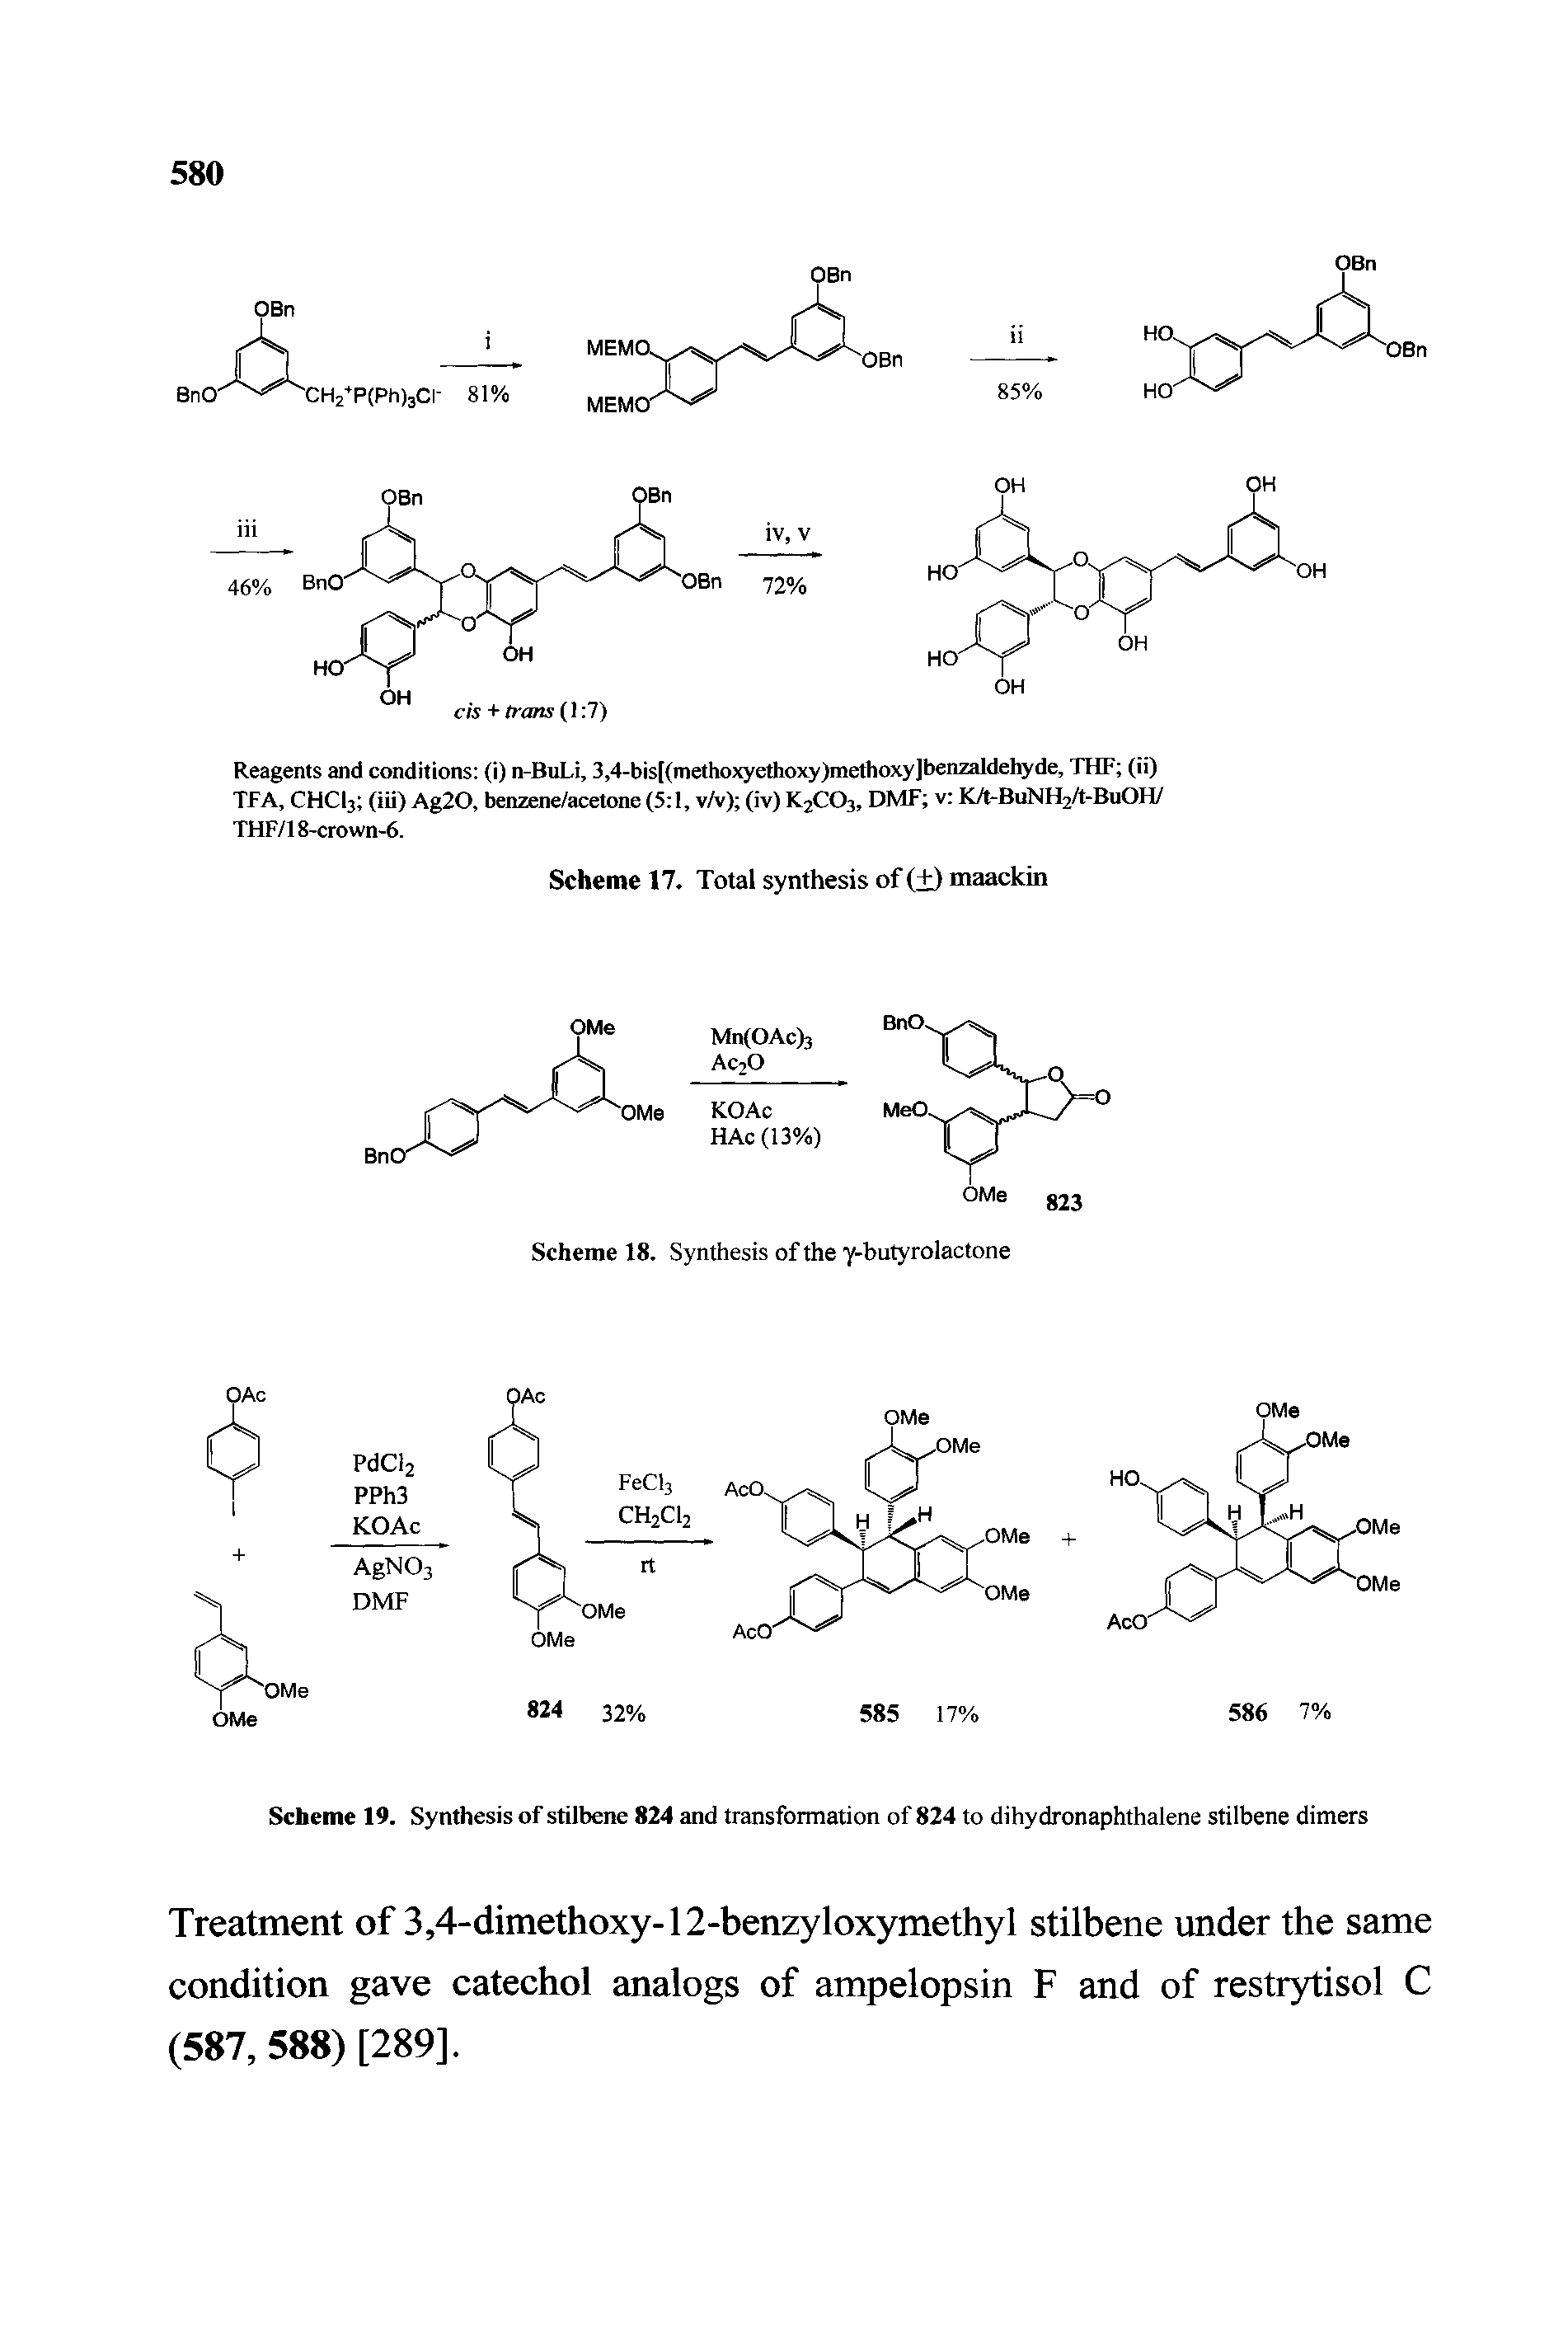 Scheme 19. Synthesis of stilbene 824 and transformation of 824 to dihydronaphthalene stilbene dimers...